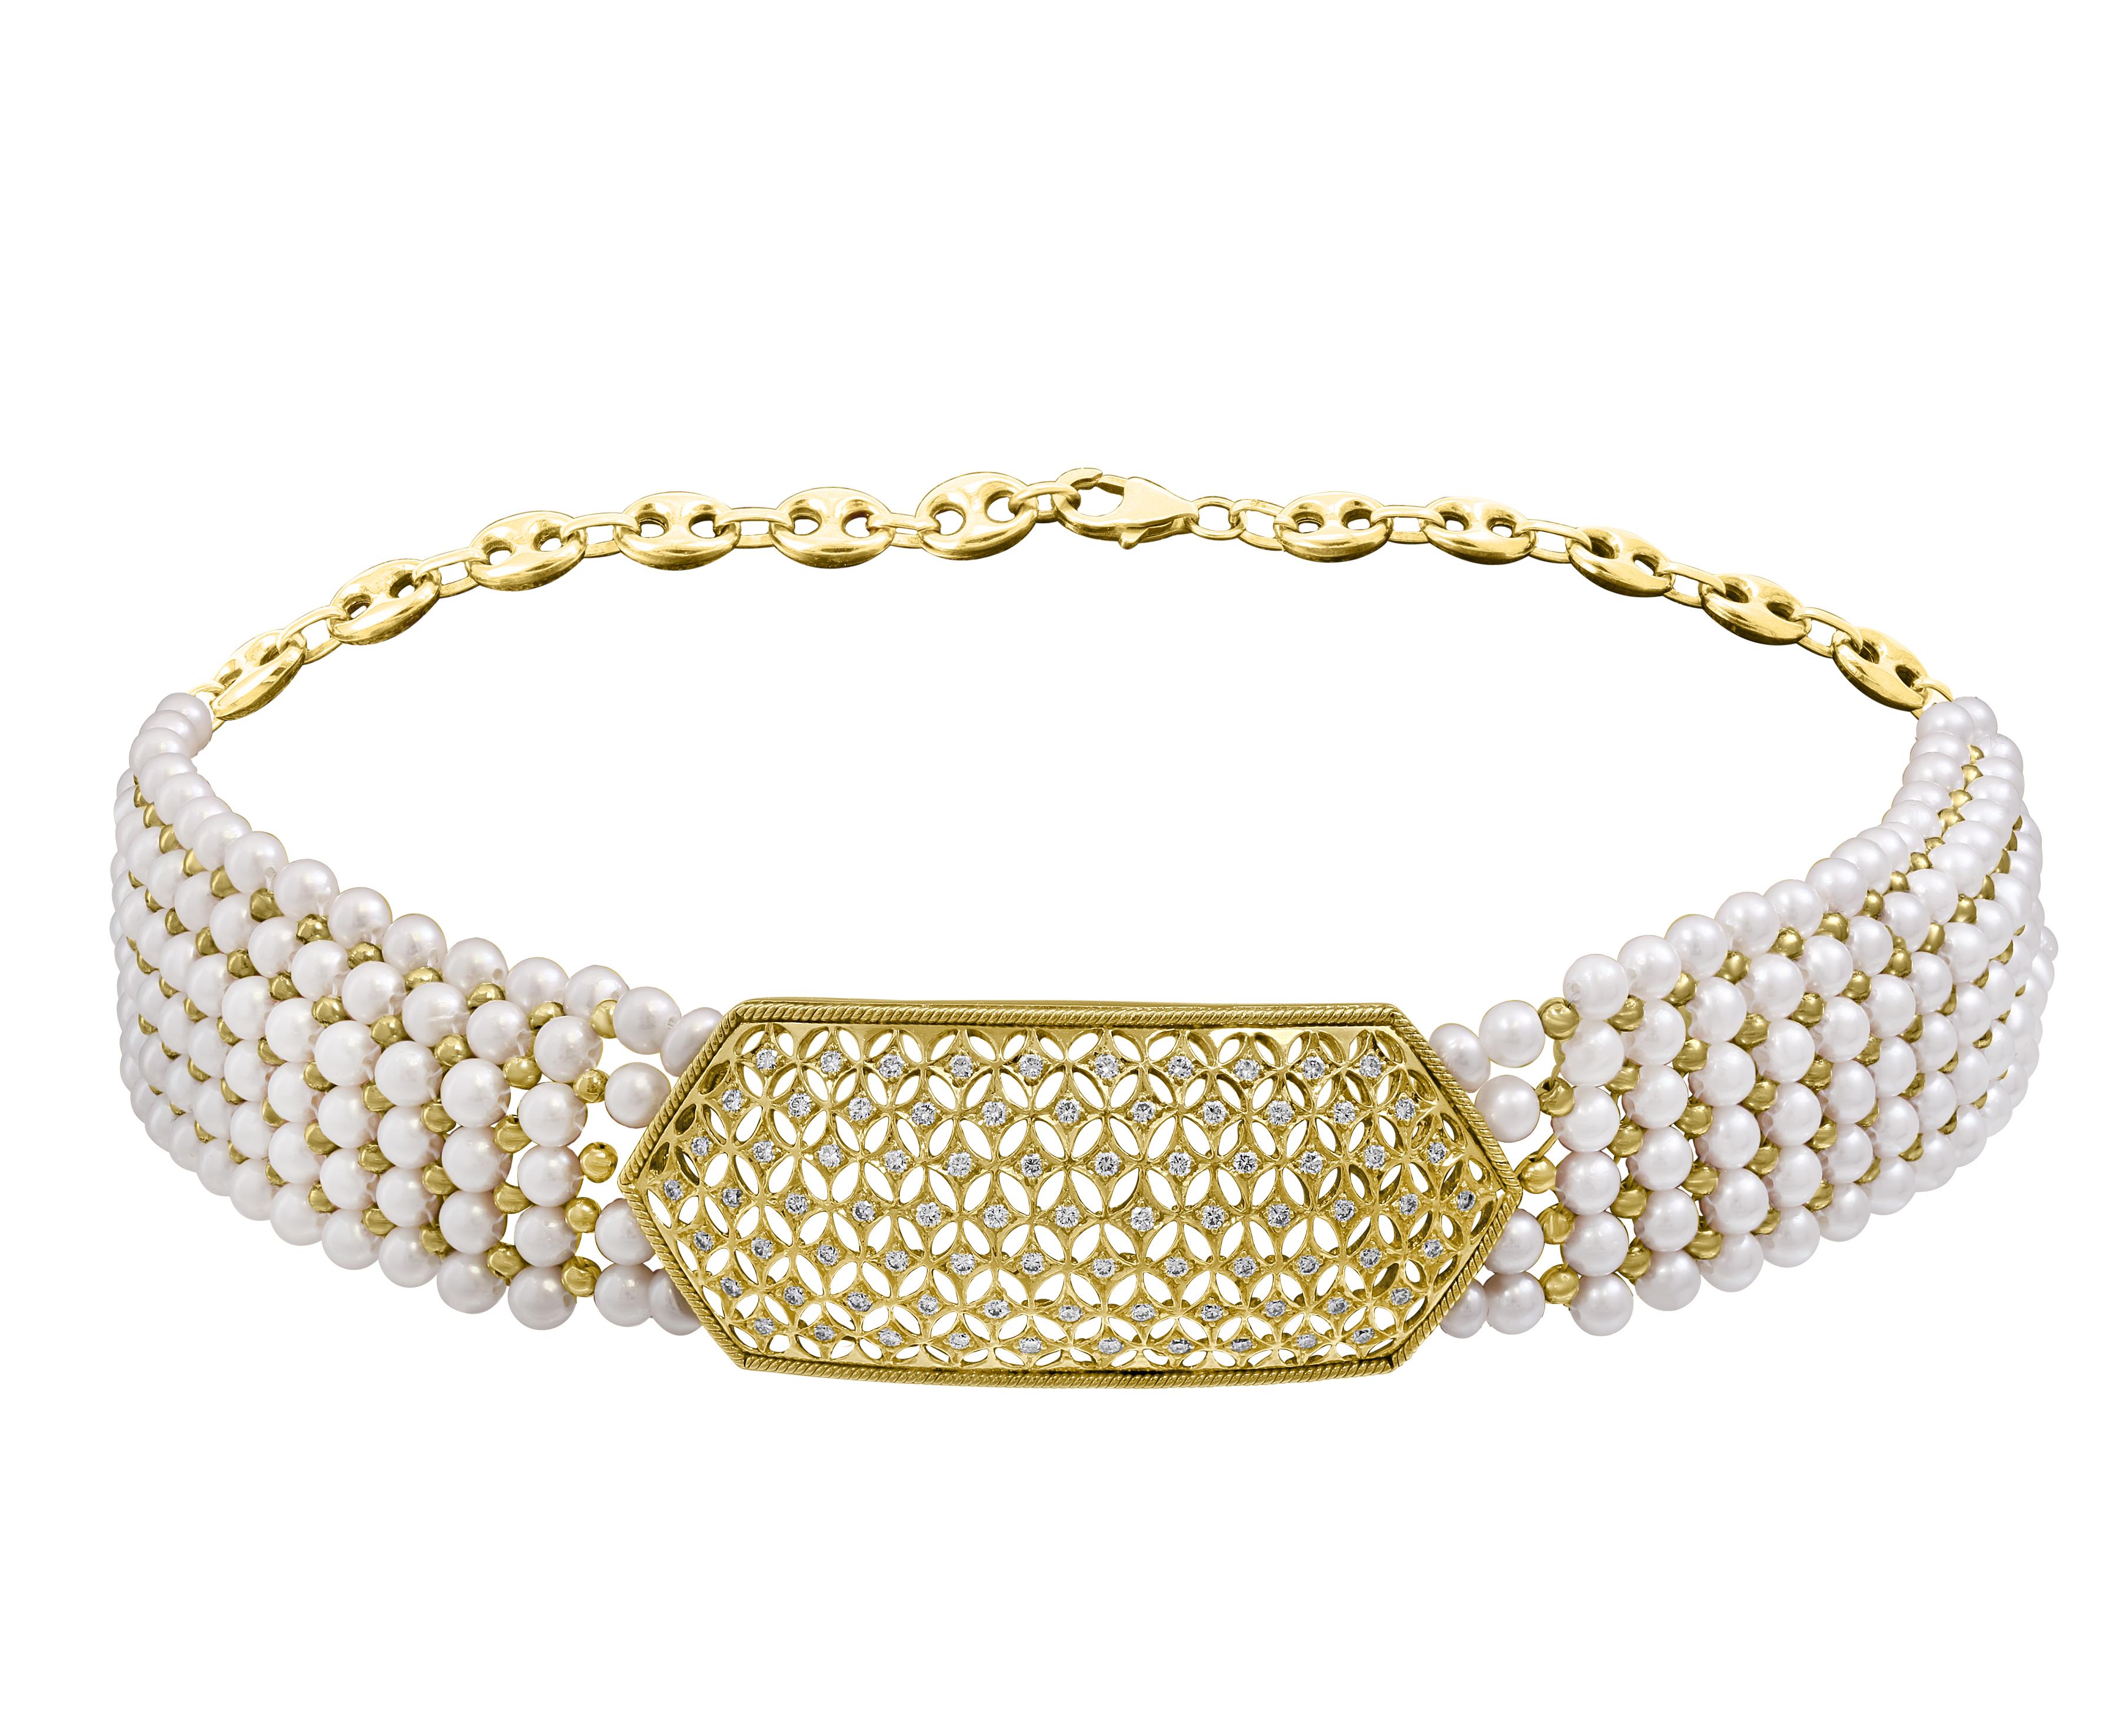 Round Cut Antique Diamond Choker Necklace with Pearls, 18 Karat Yellow Gold Bridal